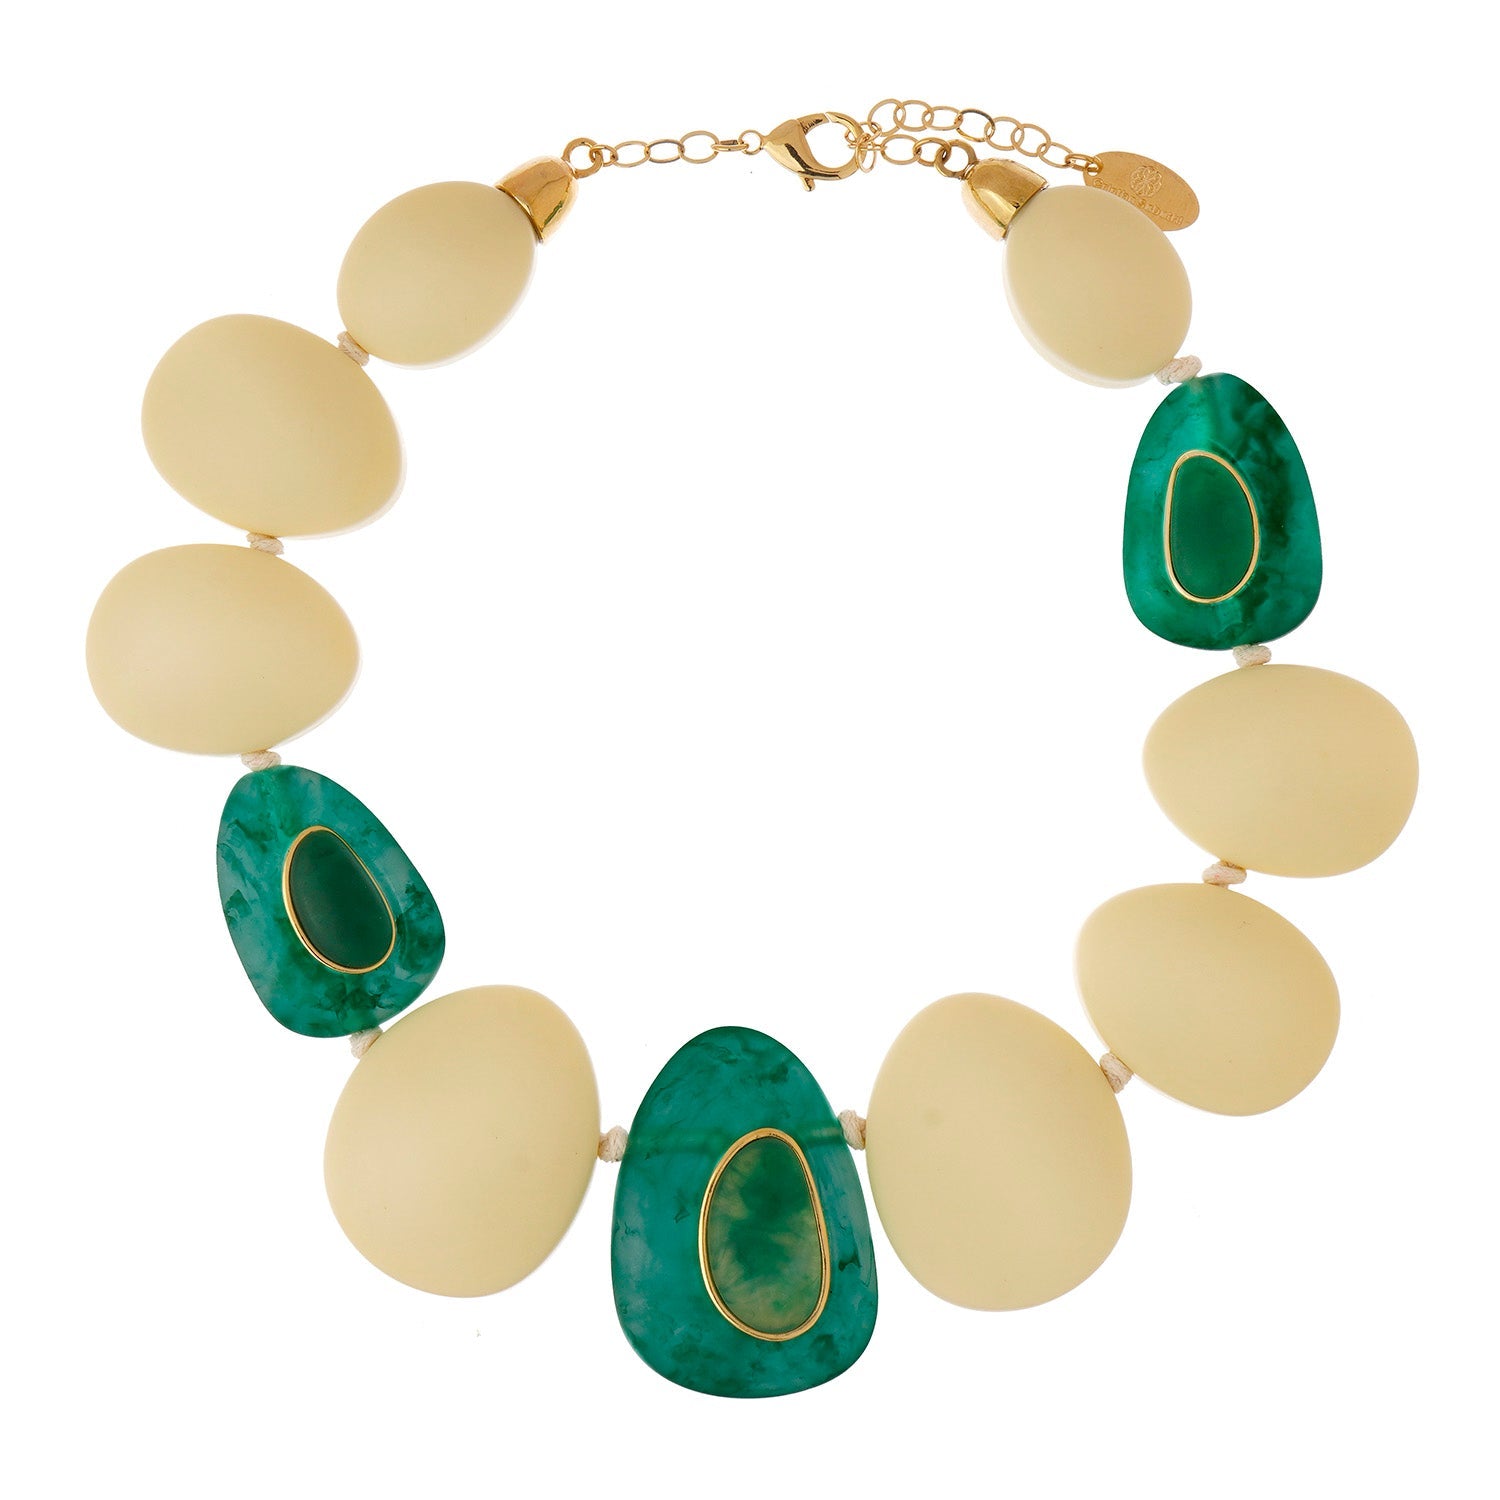 Drop Concept Resin Necklace - Green and Beige